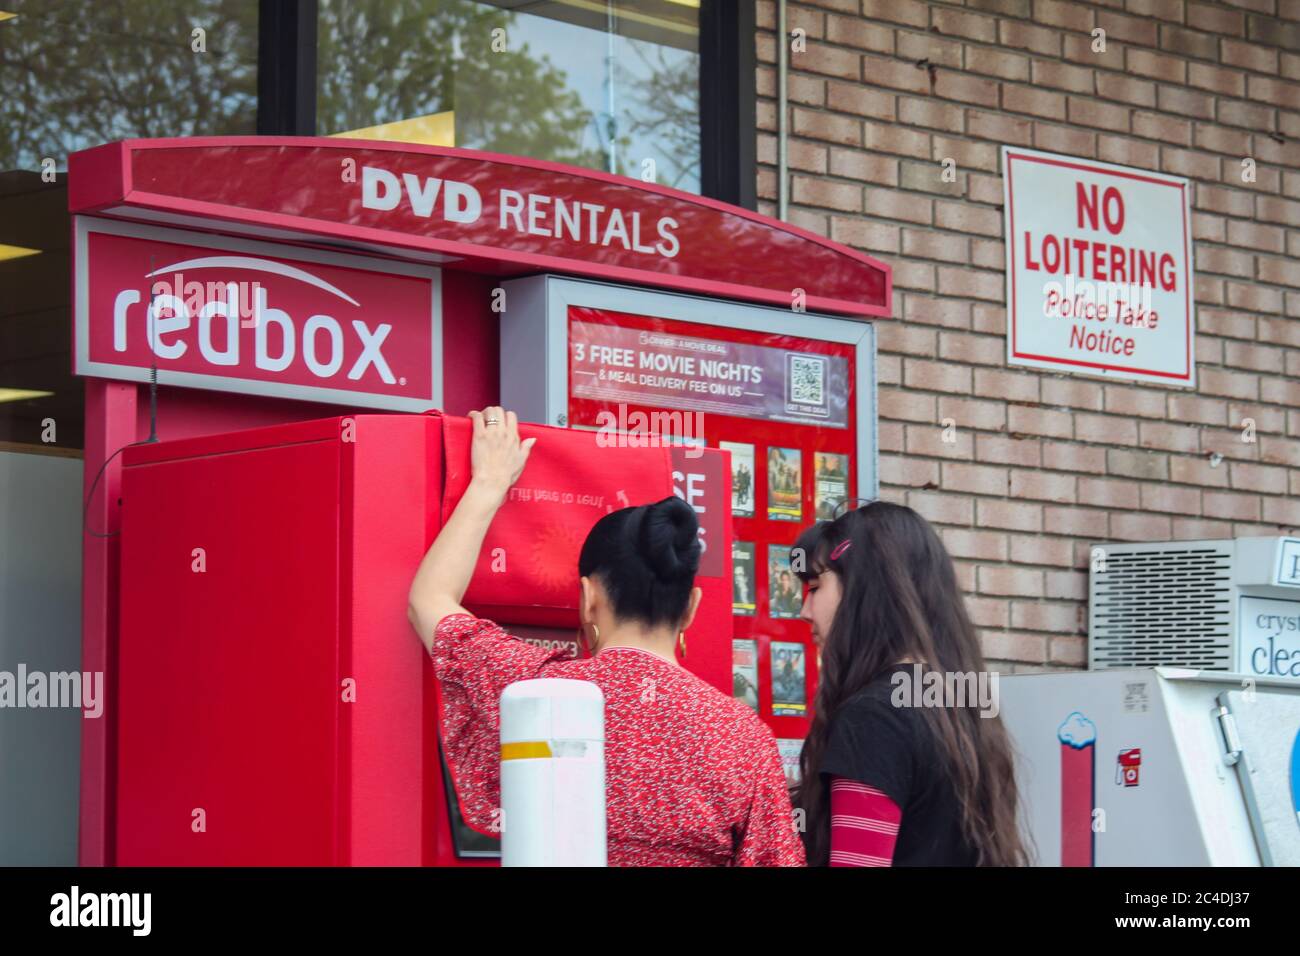 MIDDLETOWN, NY, UNITED STATES - May 02, 2020: Middletown, NY 05/02/2020: Two Women Using RedBox DVD Rentals Machine Kiosk Outside of Cumberland Farms Stock Photo